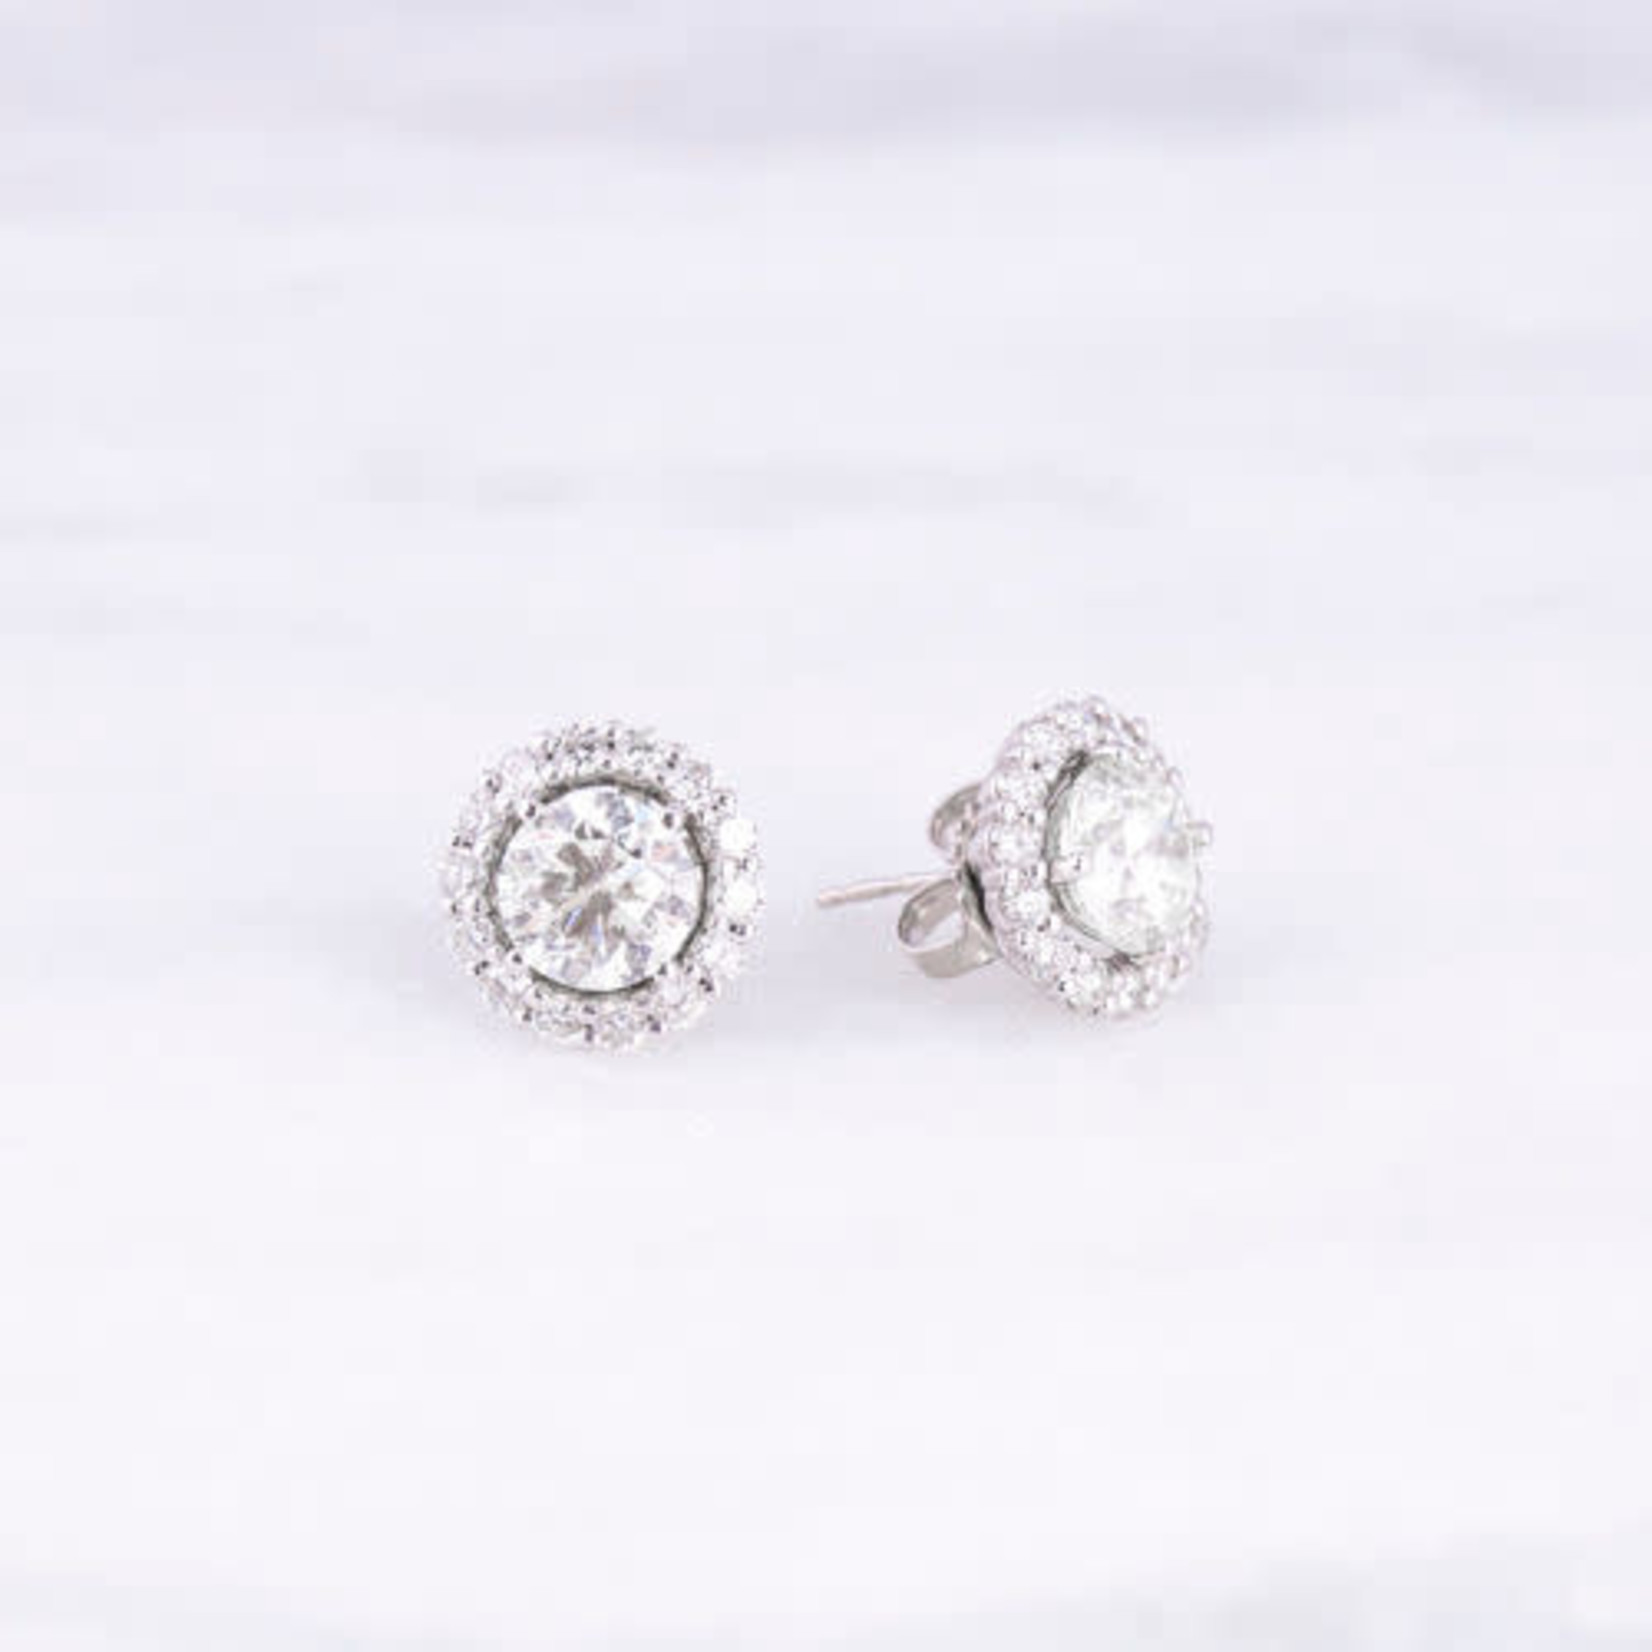 14KW Gold Diamond Earring Jackets 0.98ctw - Center Stone Not Included